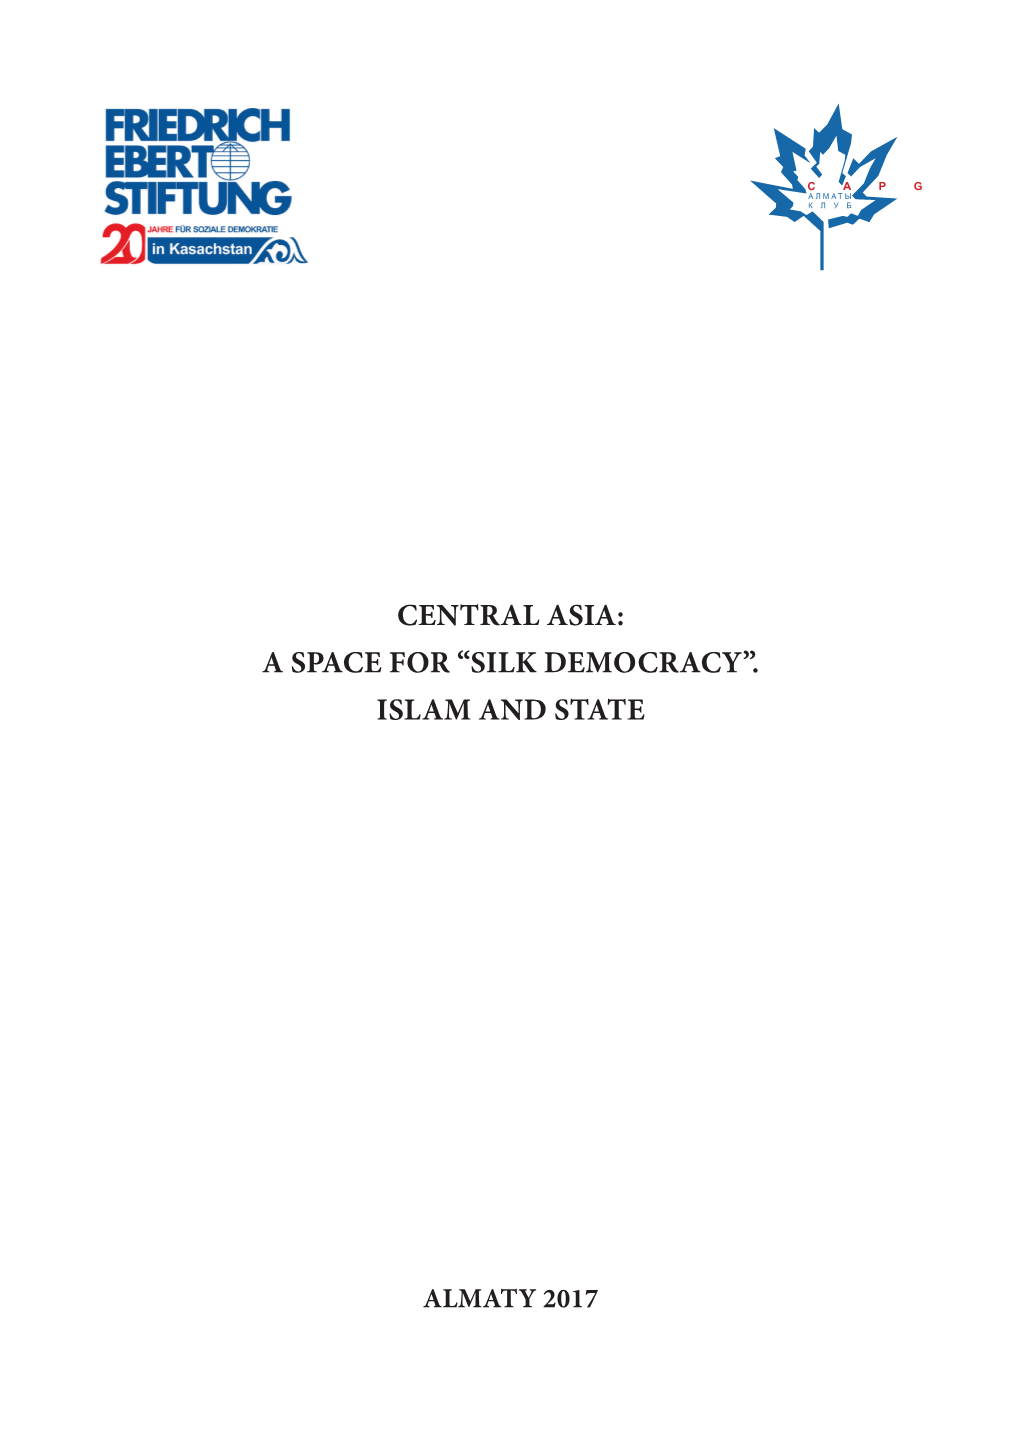 Central Asia: a Space for “Silk Democracy”. Islam and State